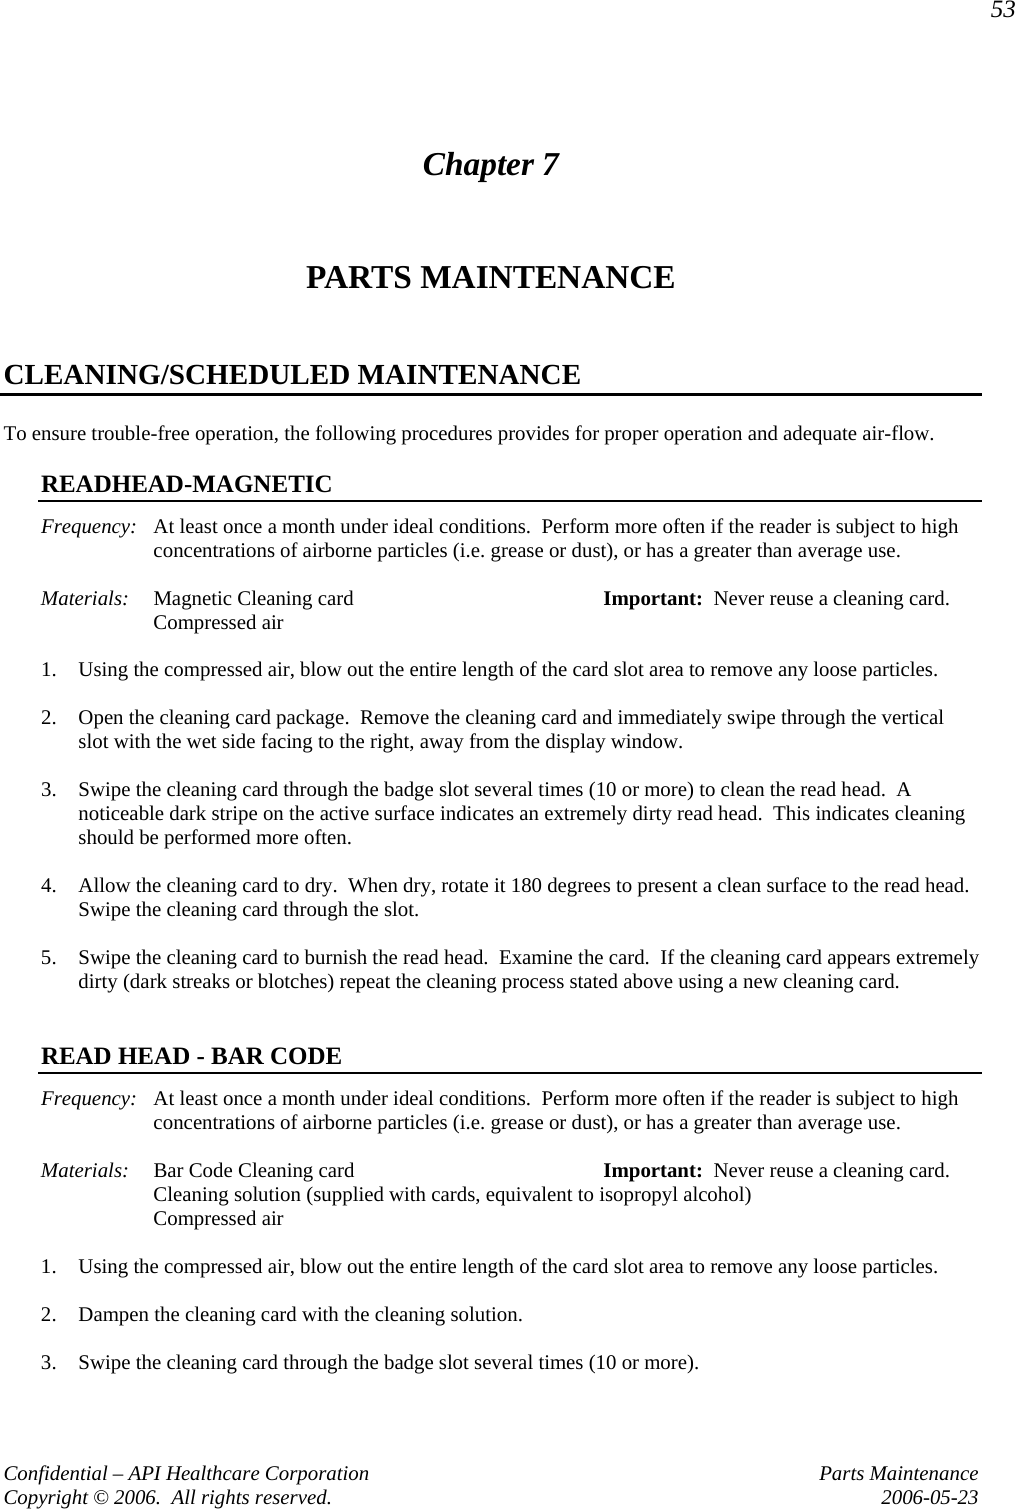 53 Confidential – API Healthcare Corporation  Parts Maintenance Copyright © 2006.  All rights reserved.  2006-05-23 Chapter 7 PARTS MAINTENANCE  CLEANING/SCHEDULED MAINTENANCE To ensure trouble-free operation, the following procedures provides for proper operation and adequate air-flow.  READHEAD-MAGNETIC Frequency:  At least once a month under ideal conditions.  Perform more often if the reader is subject to high concentrations of airborne particles (i.e. grease or dust), or has a greater than average use.  Materials:  Magnetic Cleaning card  Important:  Never reuse a cleaning card.  Compressed air  1. Using the compressed air, blow out the entire length of the card slot area to remove any loose particles.  2. Open the cleaning card package.  Remove the cleaning card and immediately swipe through the vertical slot with the wet side facing to the right, away from the display window.  3. Swipe the cleaning card through the badge slot several times (10 or more) to clean the read head.  A noticeable dark stripe on the active surface indicates an extremely dirty read head.  This indicates cleaning should be performed more often.  4. Allow the cleaning card to dry.  When dry, rotate it 180 degrees to present a clean surface to the read head.  Swipe the cleaning card through the slot.  5. Swipe the cleaning card to burnish the read head.  Examine the card.  If the cleaning card appears extremely dirty (dark streaks or blotches) repeat the cleaning process stated above using a new cleaning card.   READ HEAD - BAR CODE Frequency:  At least once a month under ideal conditions.  Perform more often if the reader is subject to high concentrations of airborne particles (i.e. grease or dust), or has a greater than average use.  Materials:  Bar Code Cleaning card   Important:  Never reuse a cleaning card.   Cleaning solution (supplied with cards, equivalent to isopropyl alcohol)  Compressed air  1. Using the compressed air, blow out the entire length of the card slot area to remove any loose particles.  2. Dampen the cleaning card with the cleaning solution.  3. Swipe the cleaning card through the badge slot several times (10 or more).  